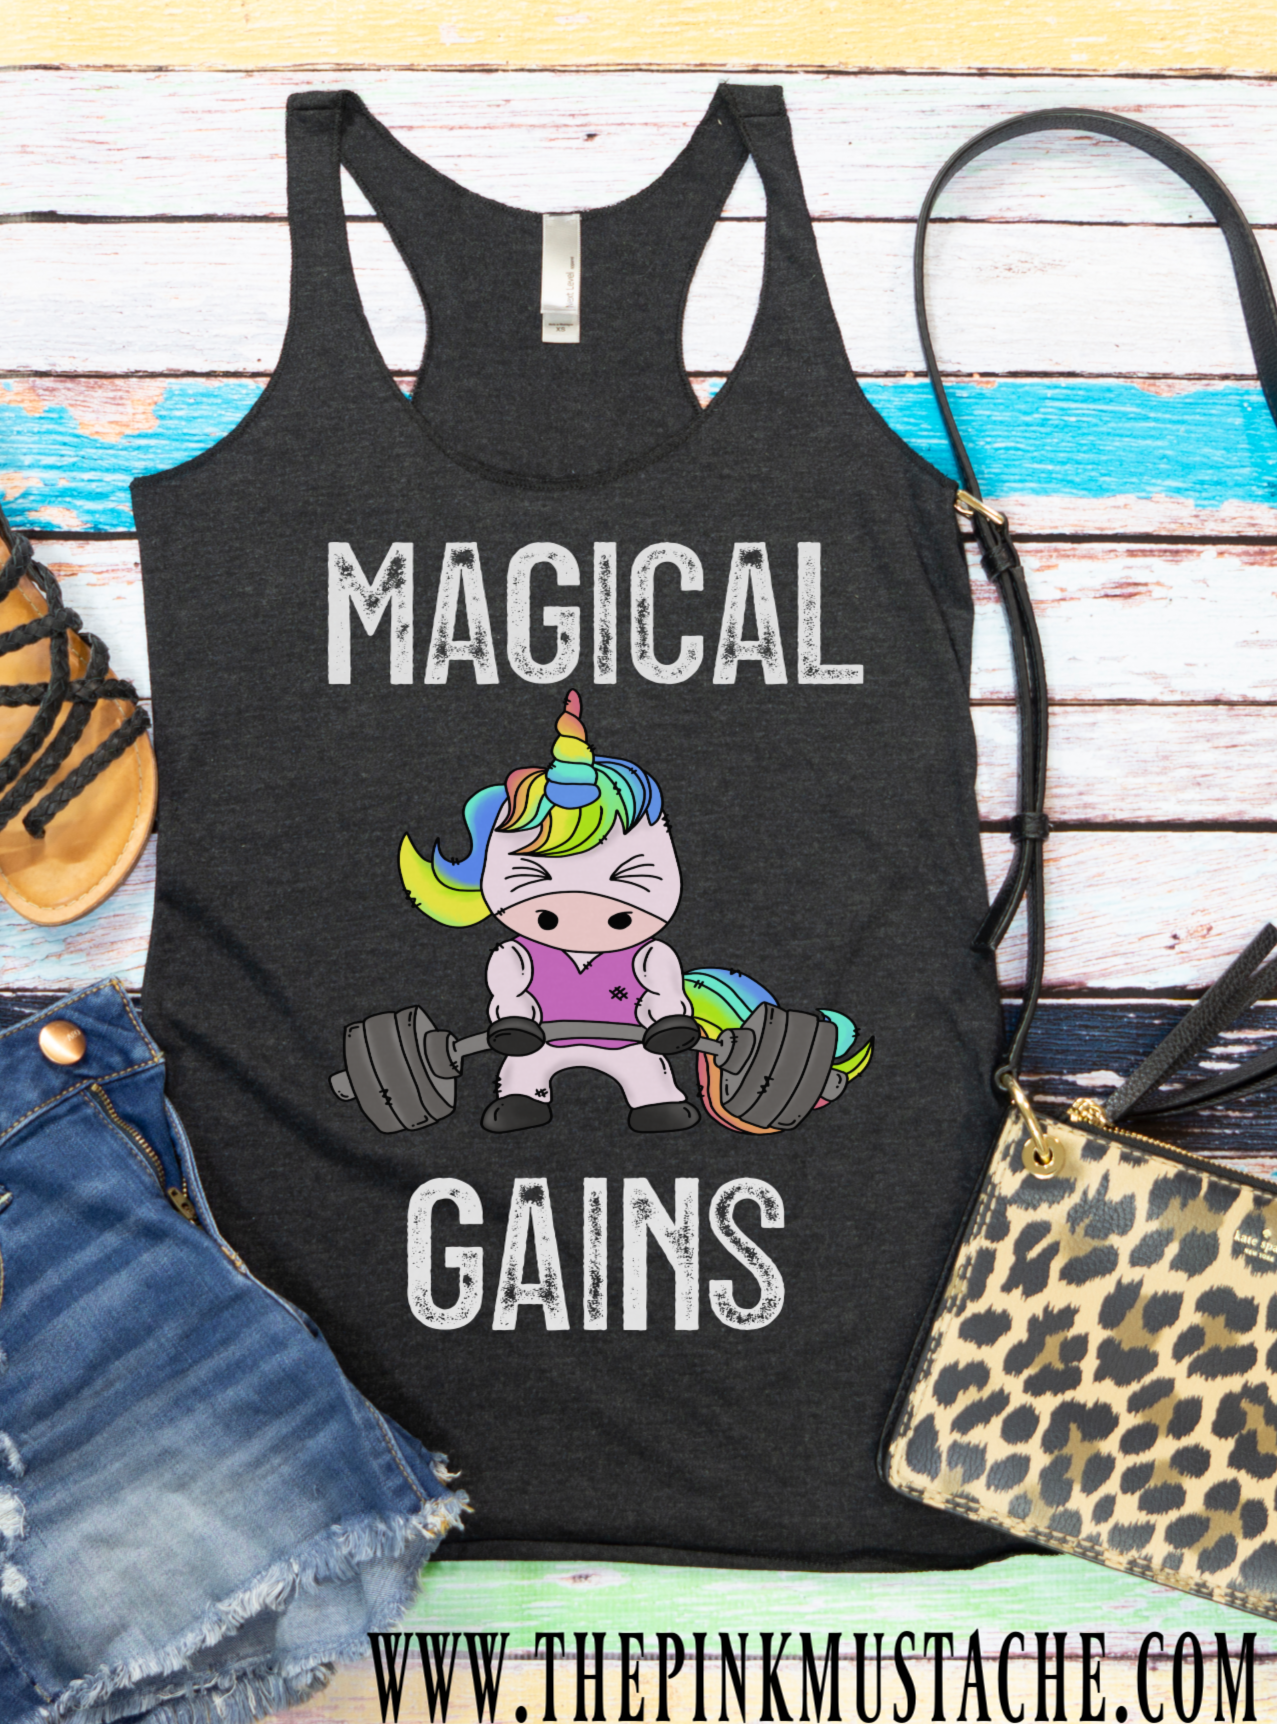 They're Not Regular Gains, They're MAGICAL Gains - Unicorn Tank Top - Crossfit